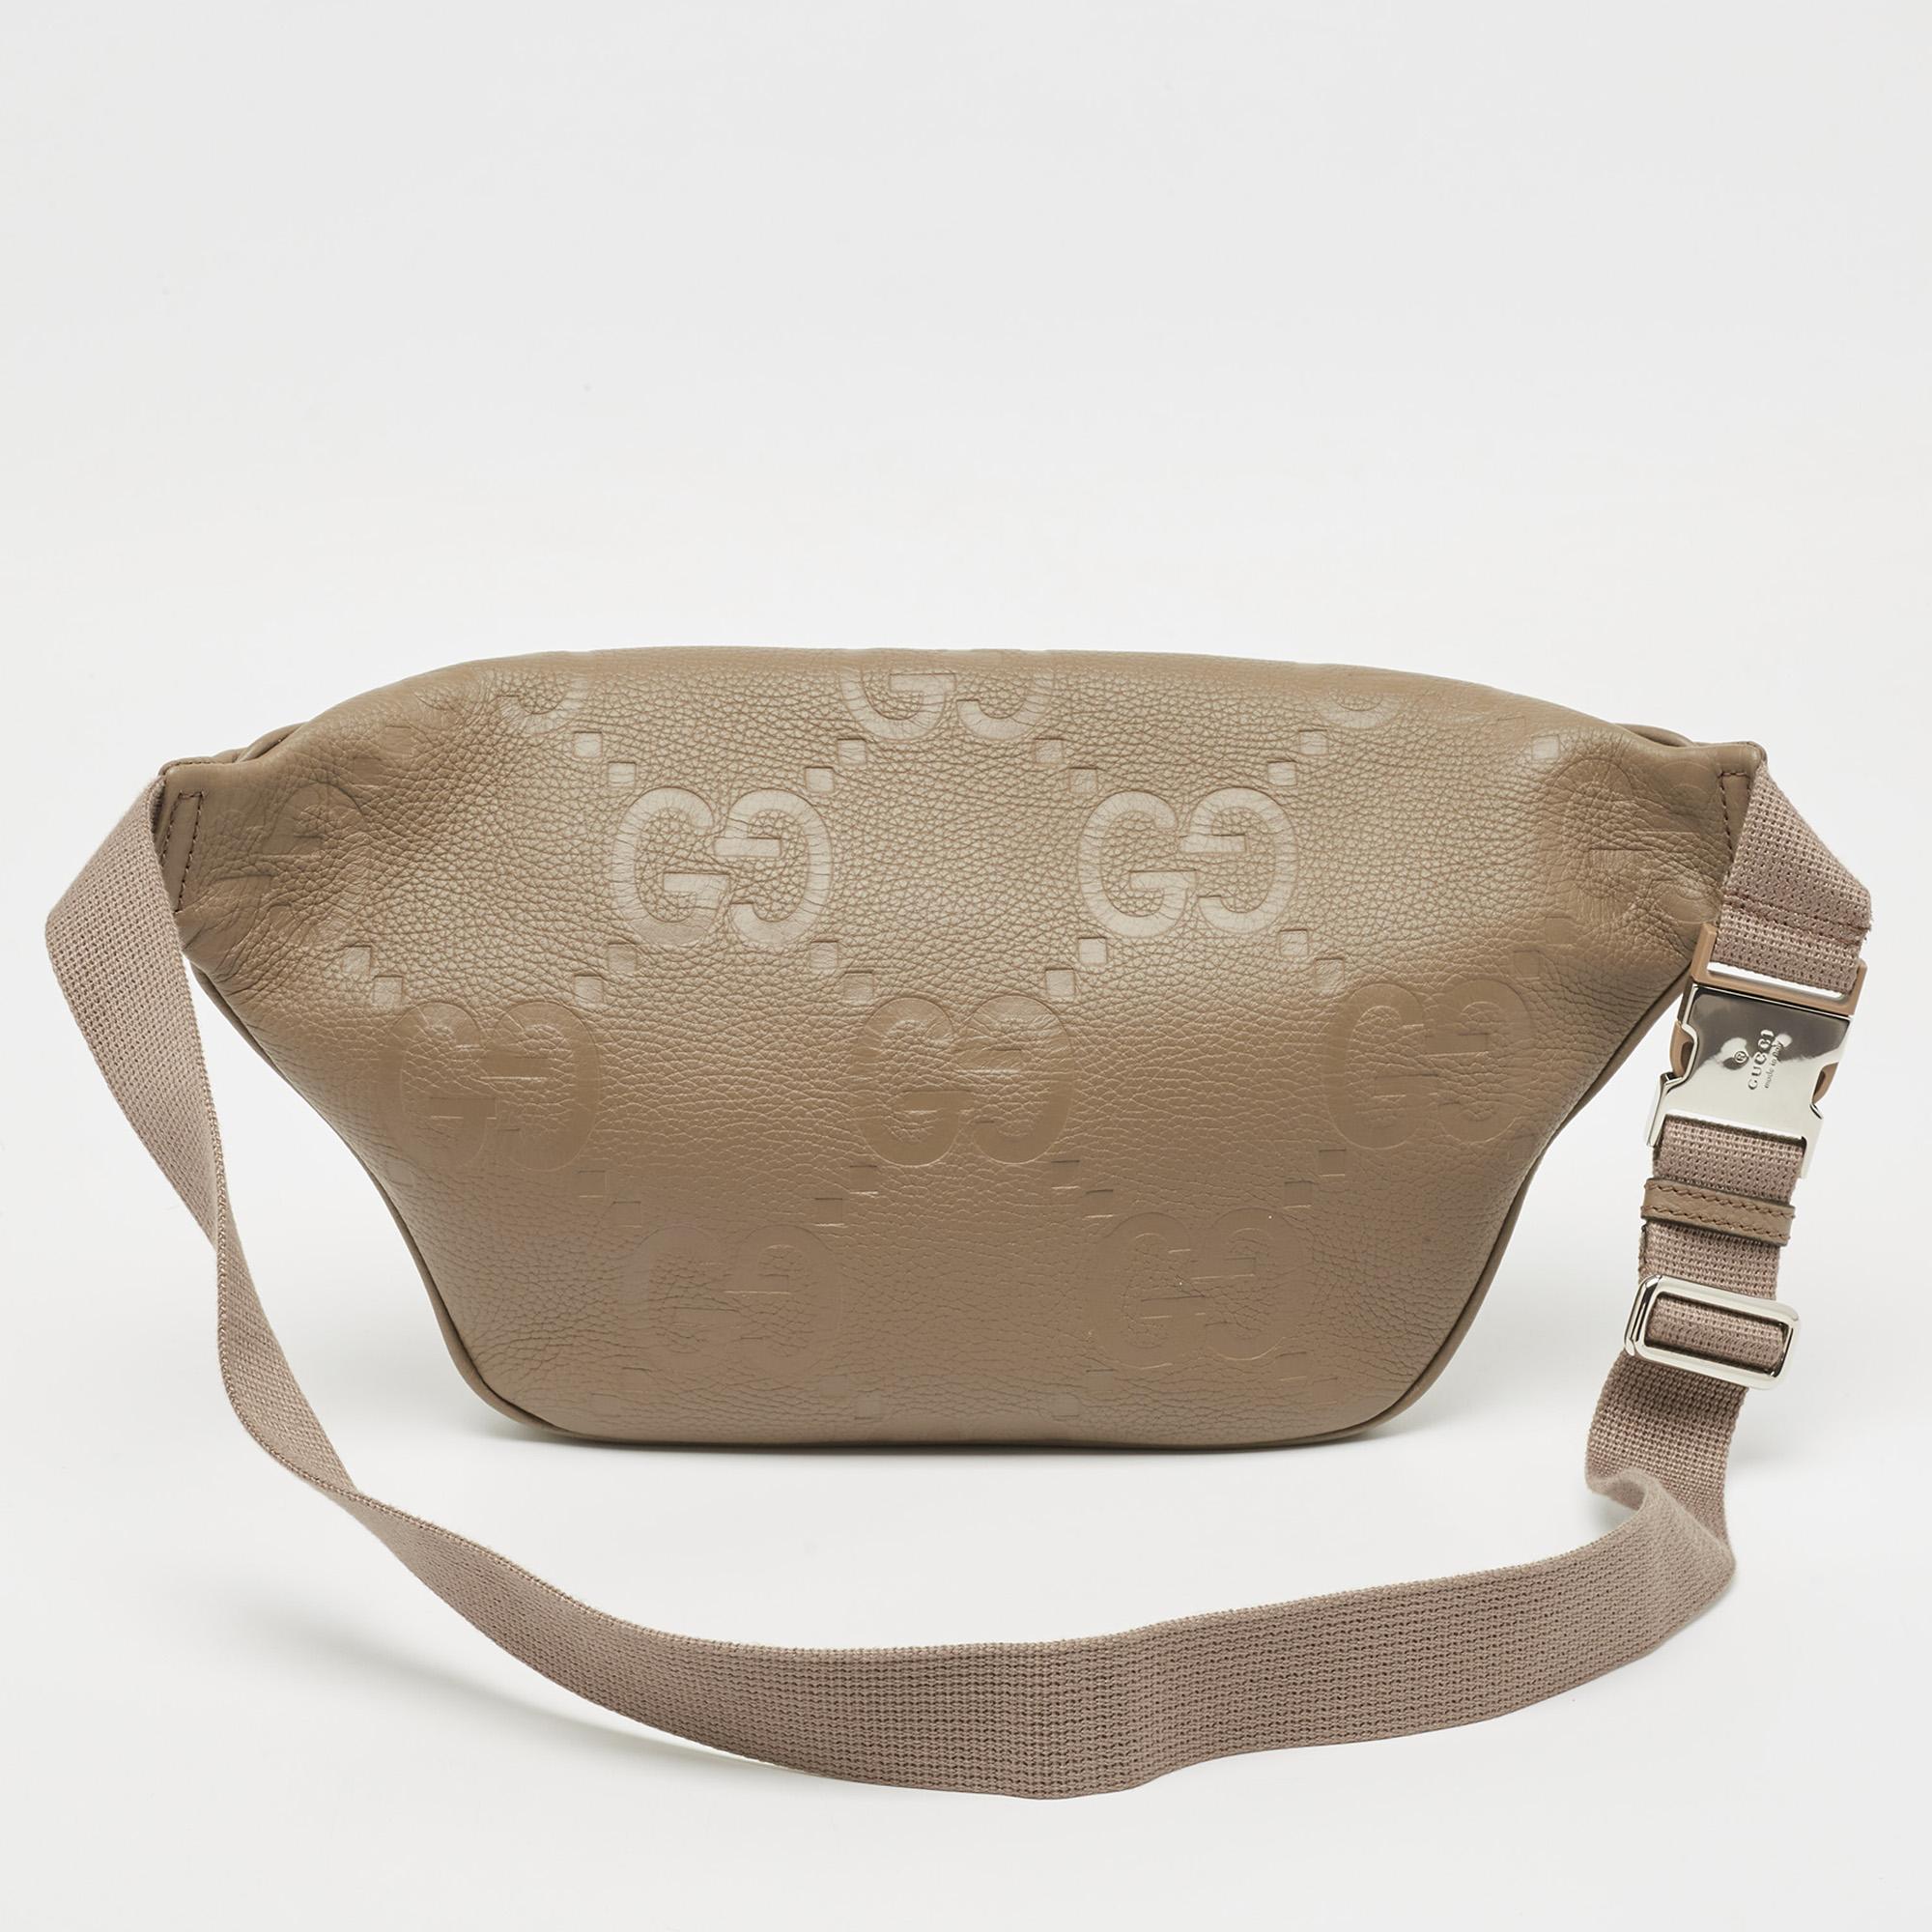 Belt bags are edgy, stylish and will never disappoint you when it comes to completing an outfit! This Gucci one is crafted wonderfully with a smart exterior, a compact, well-lined interior, and an adjustable belt that sits perfectly on your waist.